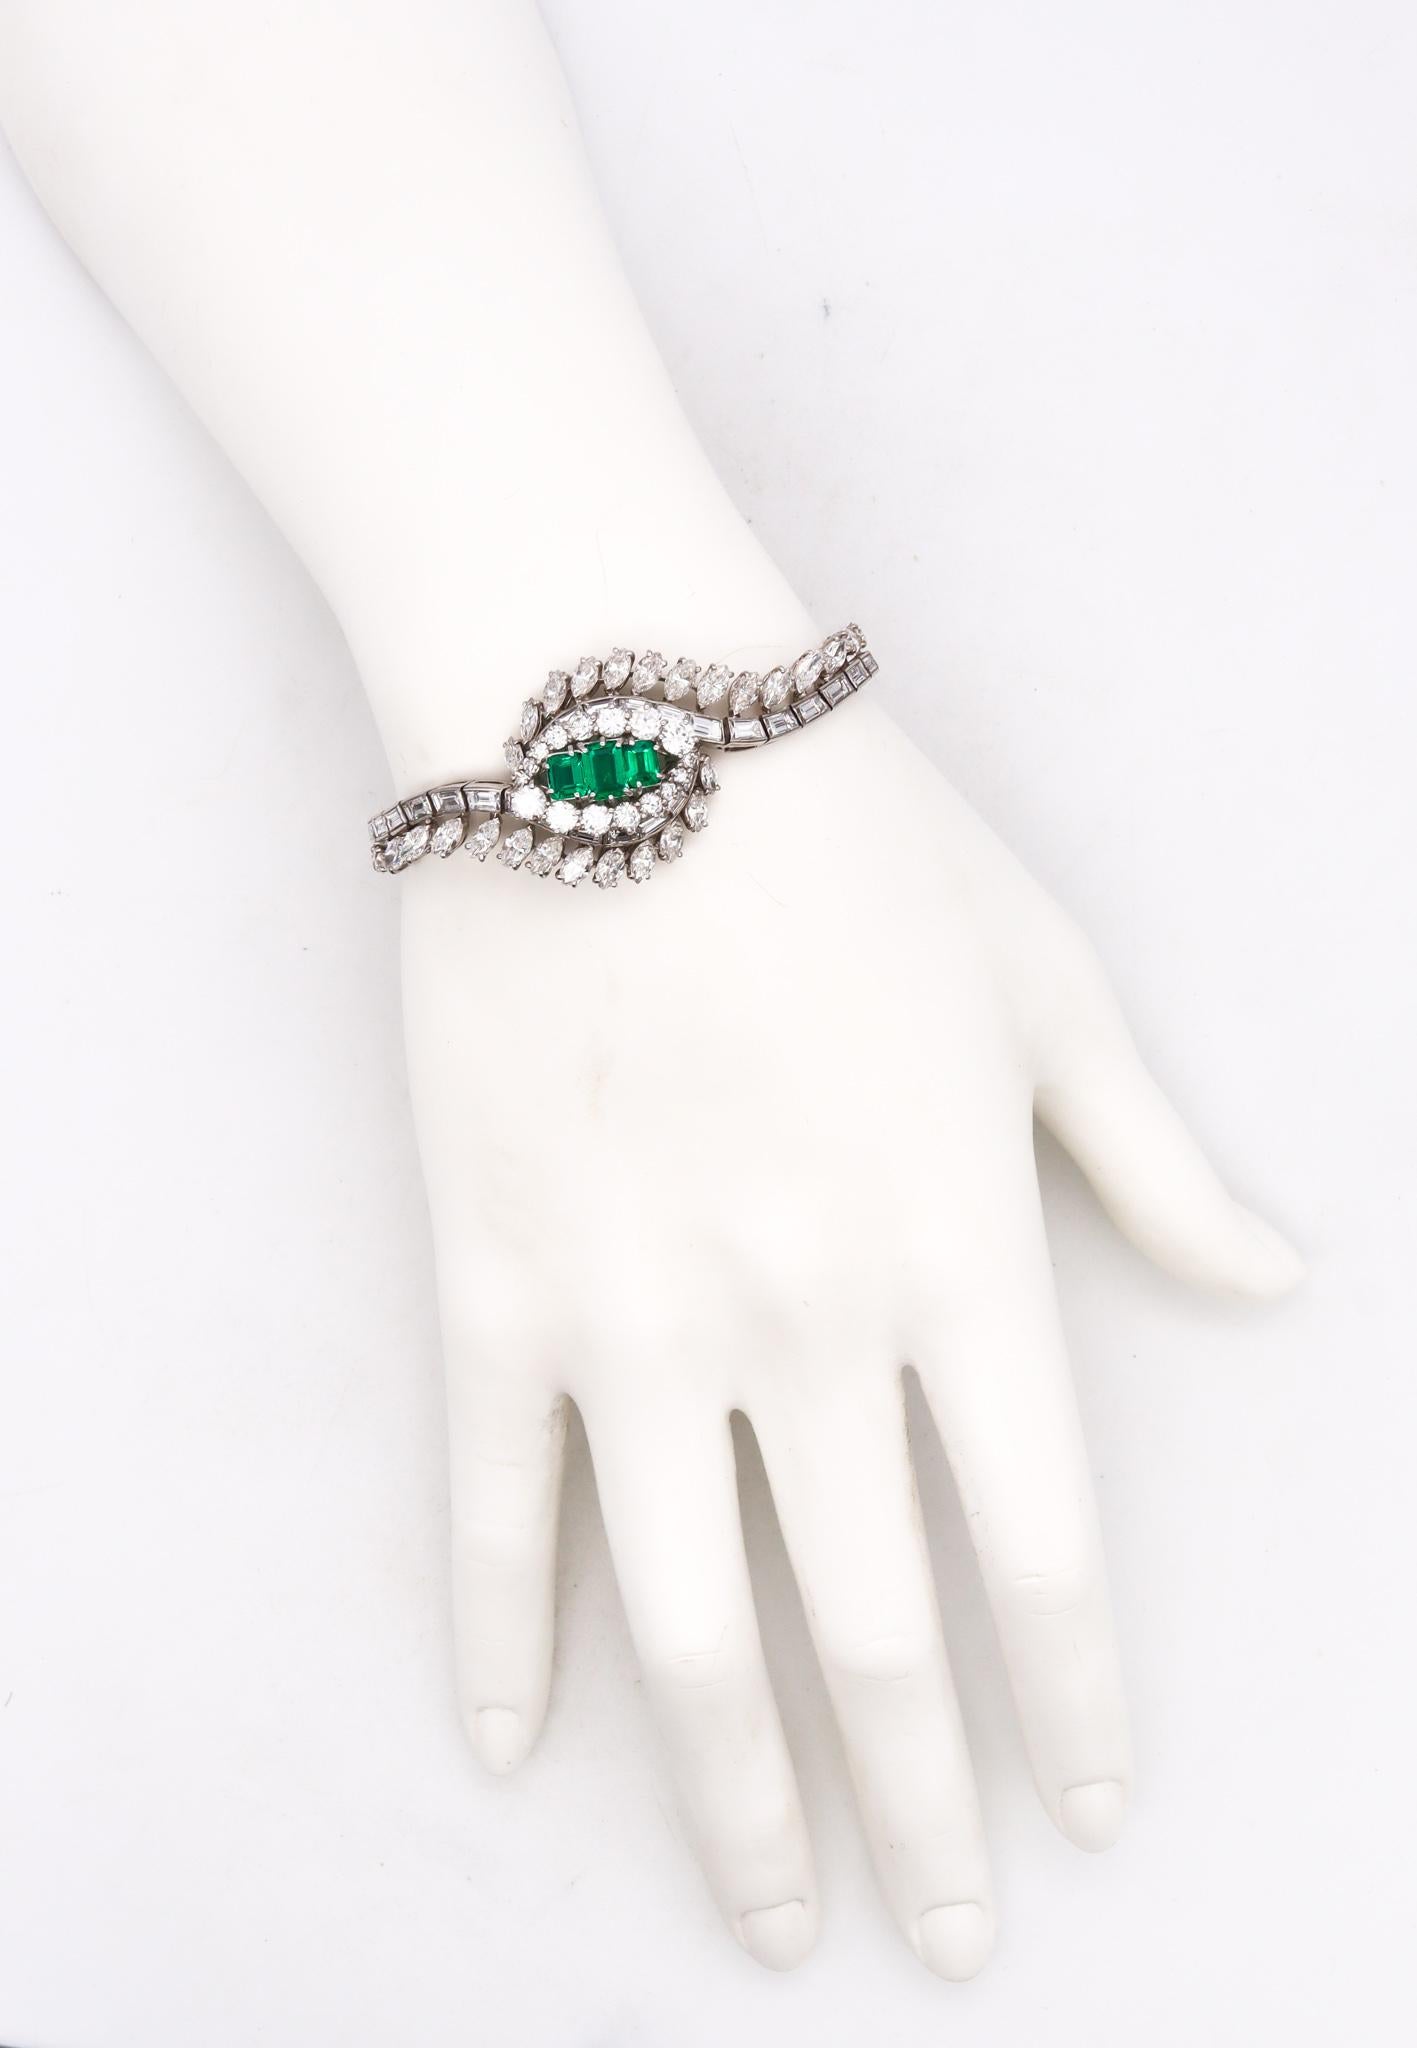 Art-Deco platinum bracelet with Diamonds and Emeralds. 

An important piece from the late American art deco period, circa 1940's. It was totally assembled and crafted in solid .900/.999 platinum with .100/.999 iridium and suited with a push box